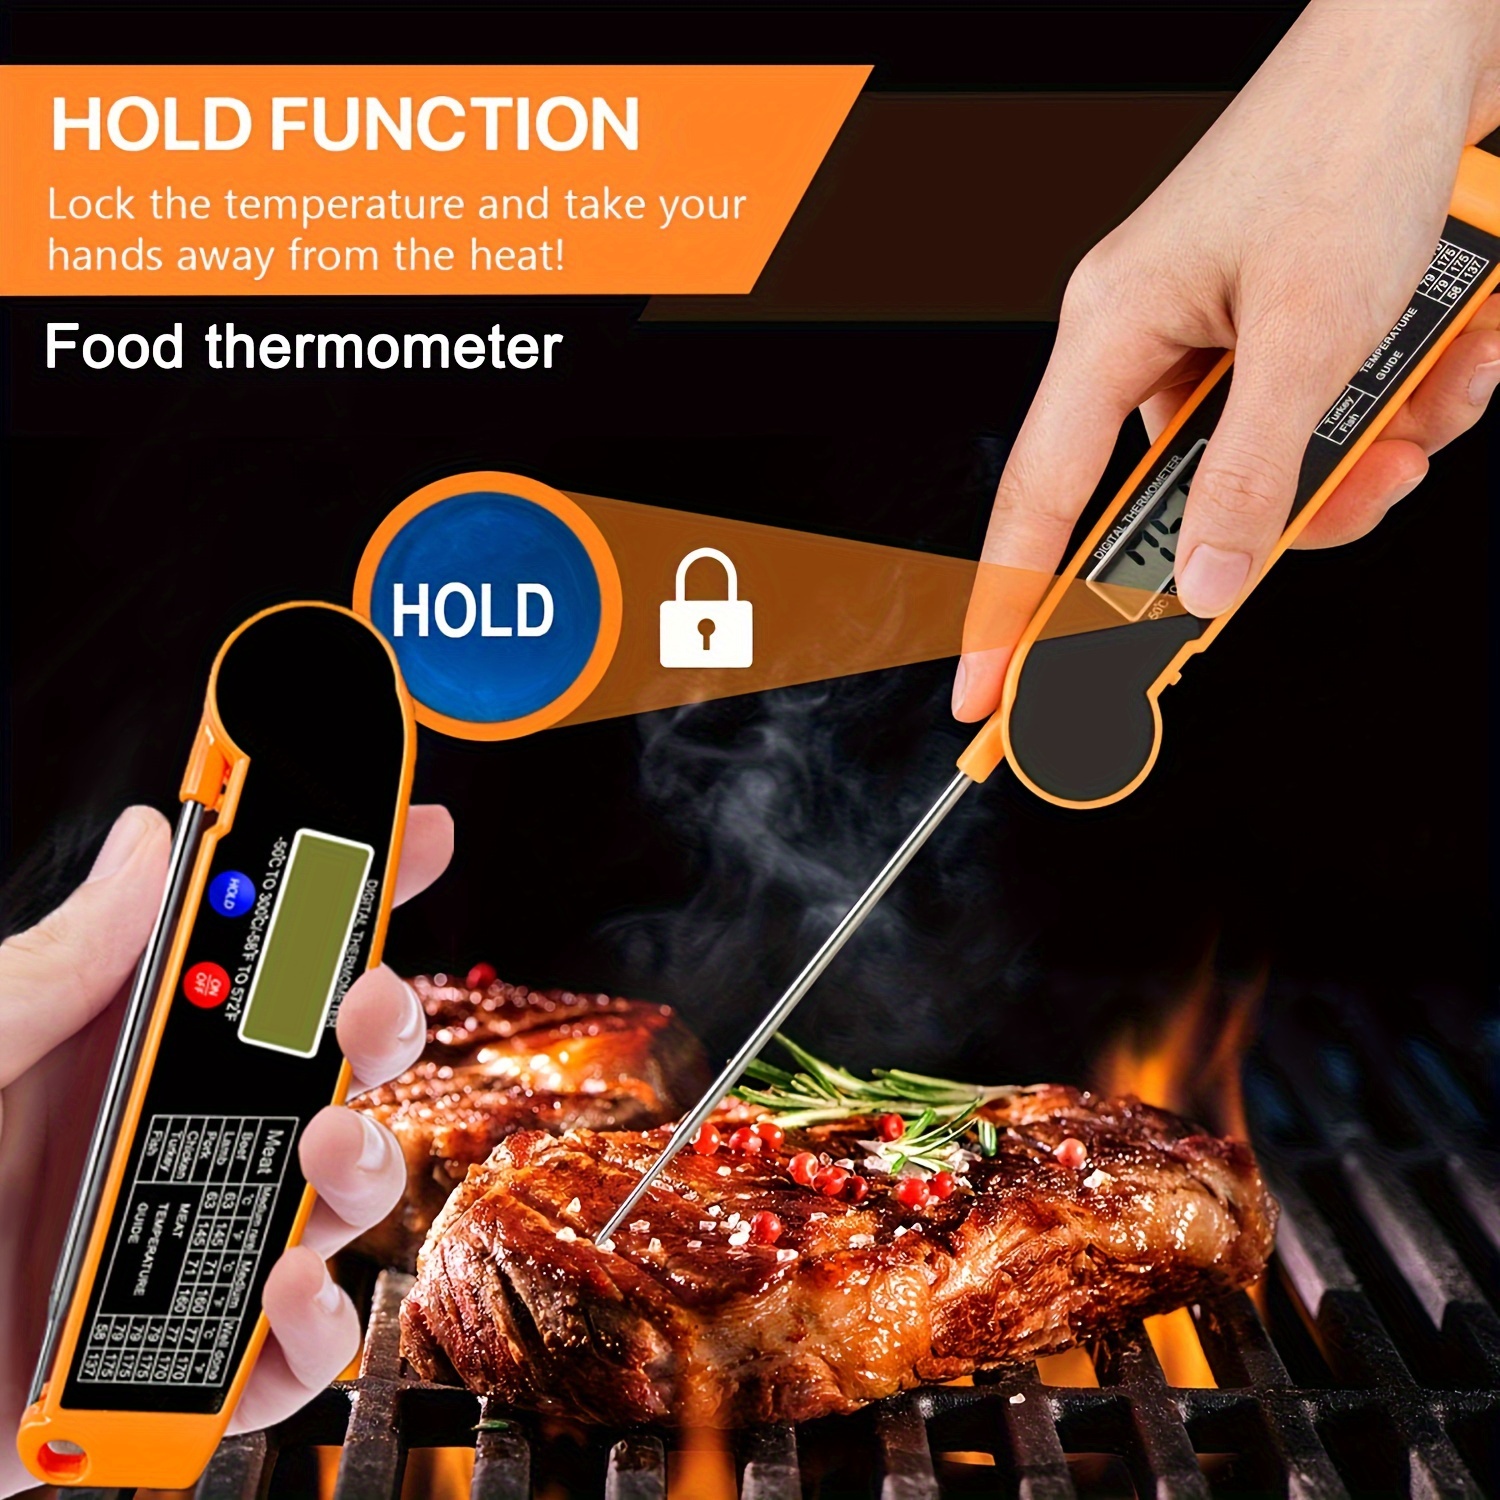 Oil Thermometer Deep Fry, Stainless Steel Meat Cooking Thermometer with  Clip and 15.7 inch Long Probe, Instant Read Kitchen Thermometer for Deep Frying  Candy Turkey BBQ Grill 